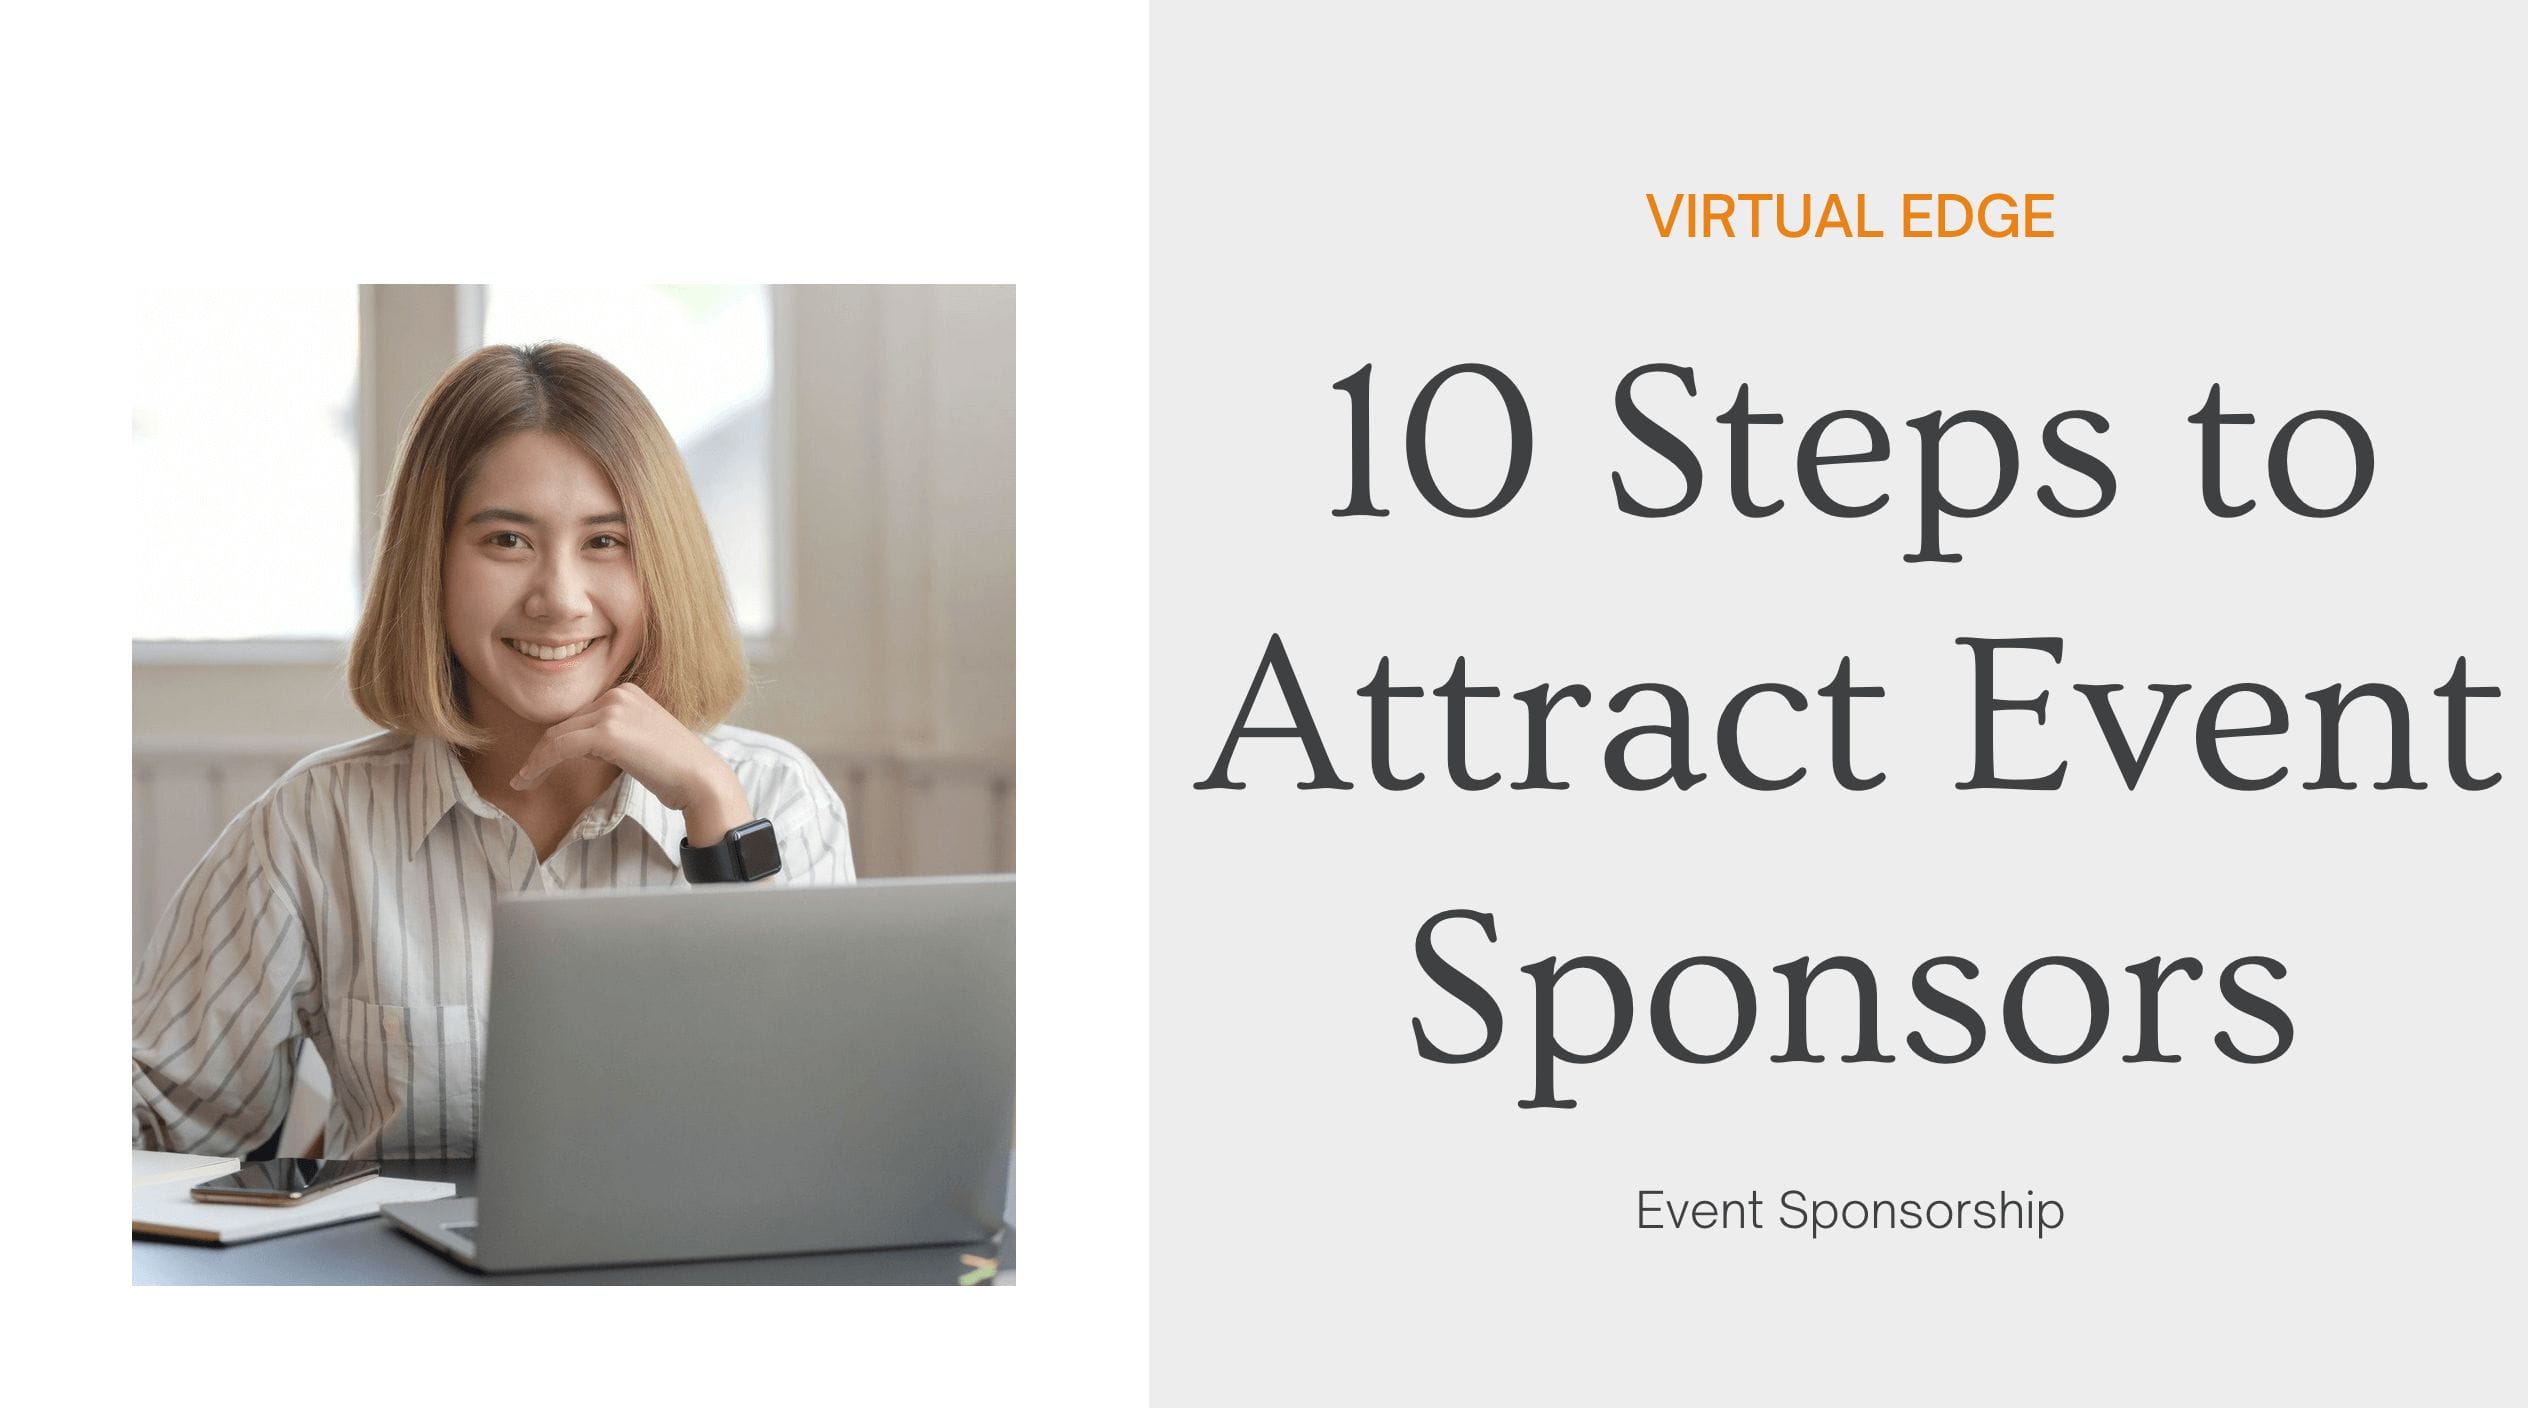 10 Steps to Attract Event Sponsors